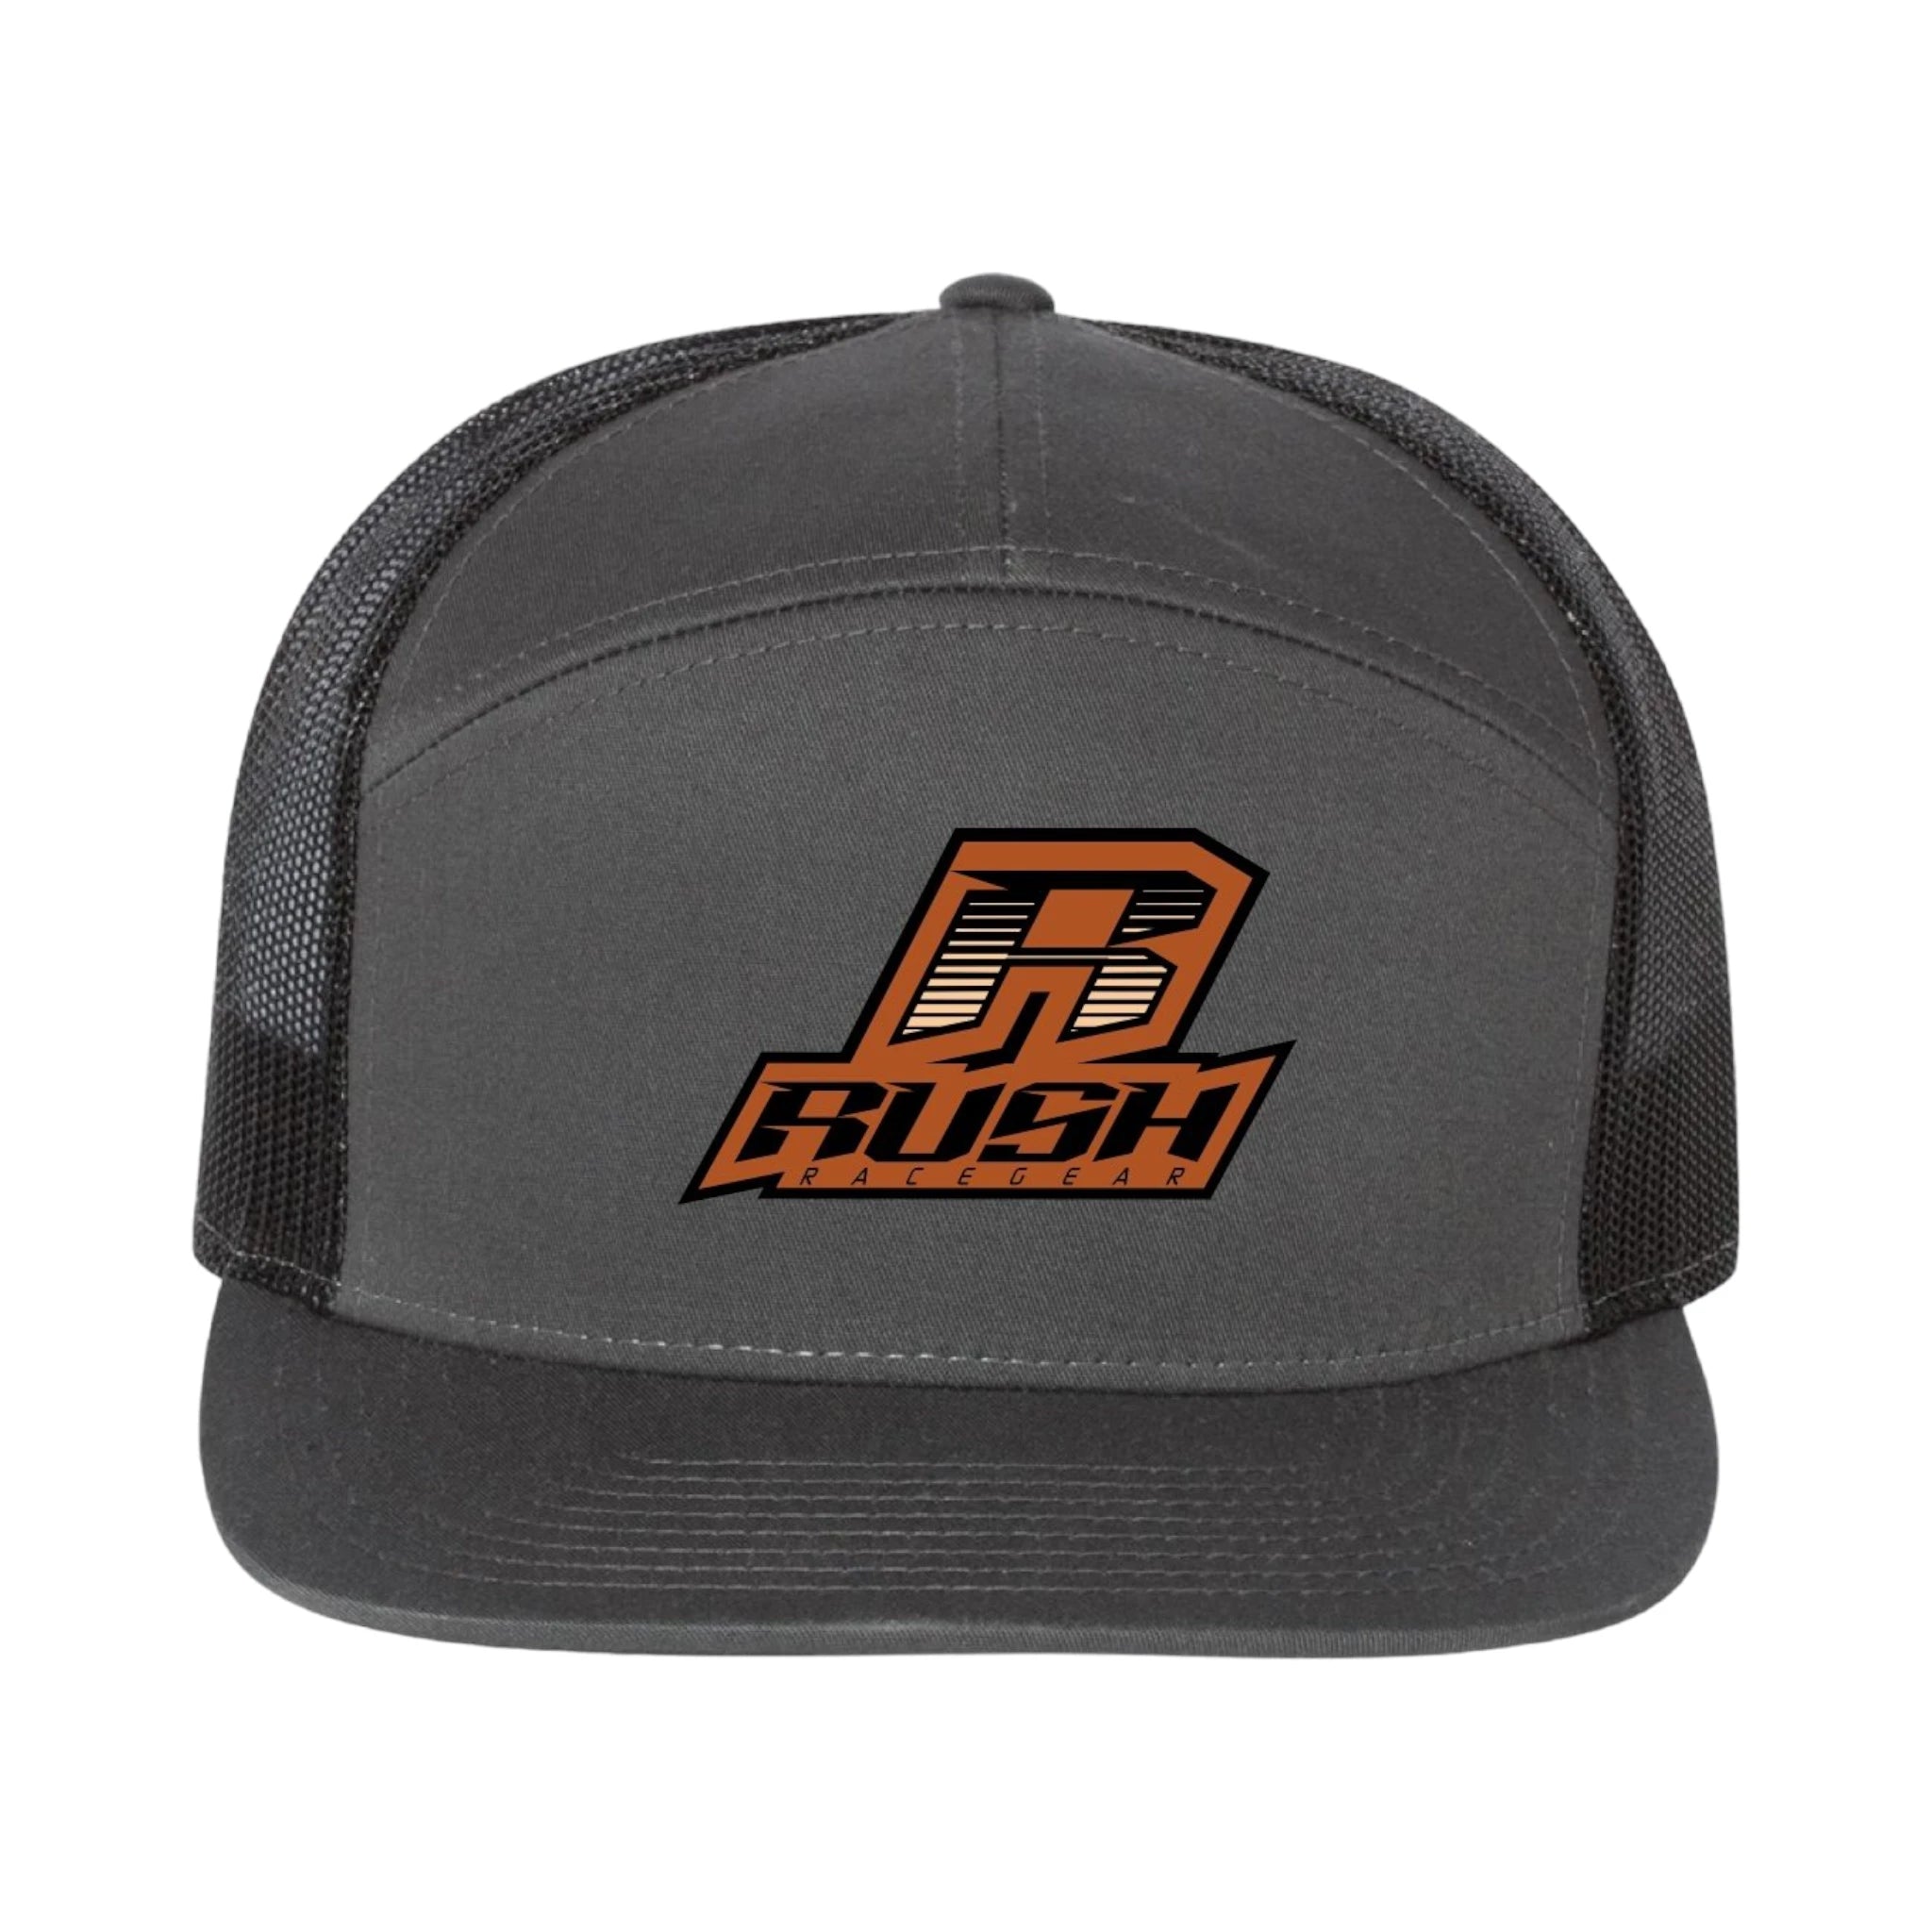 Rush Leather Patch Hat